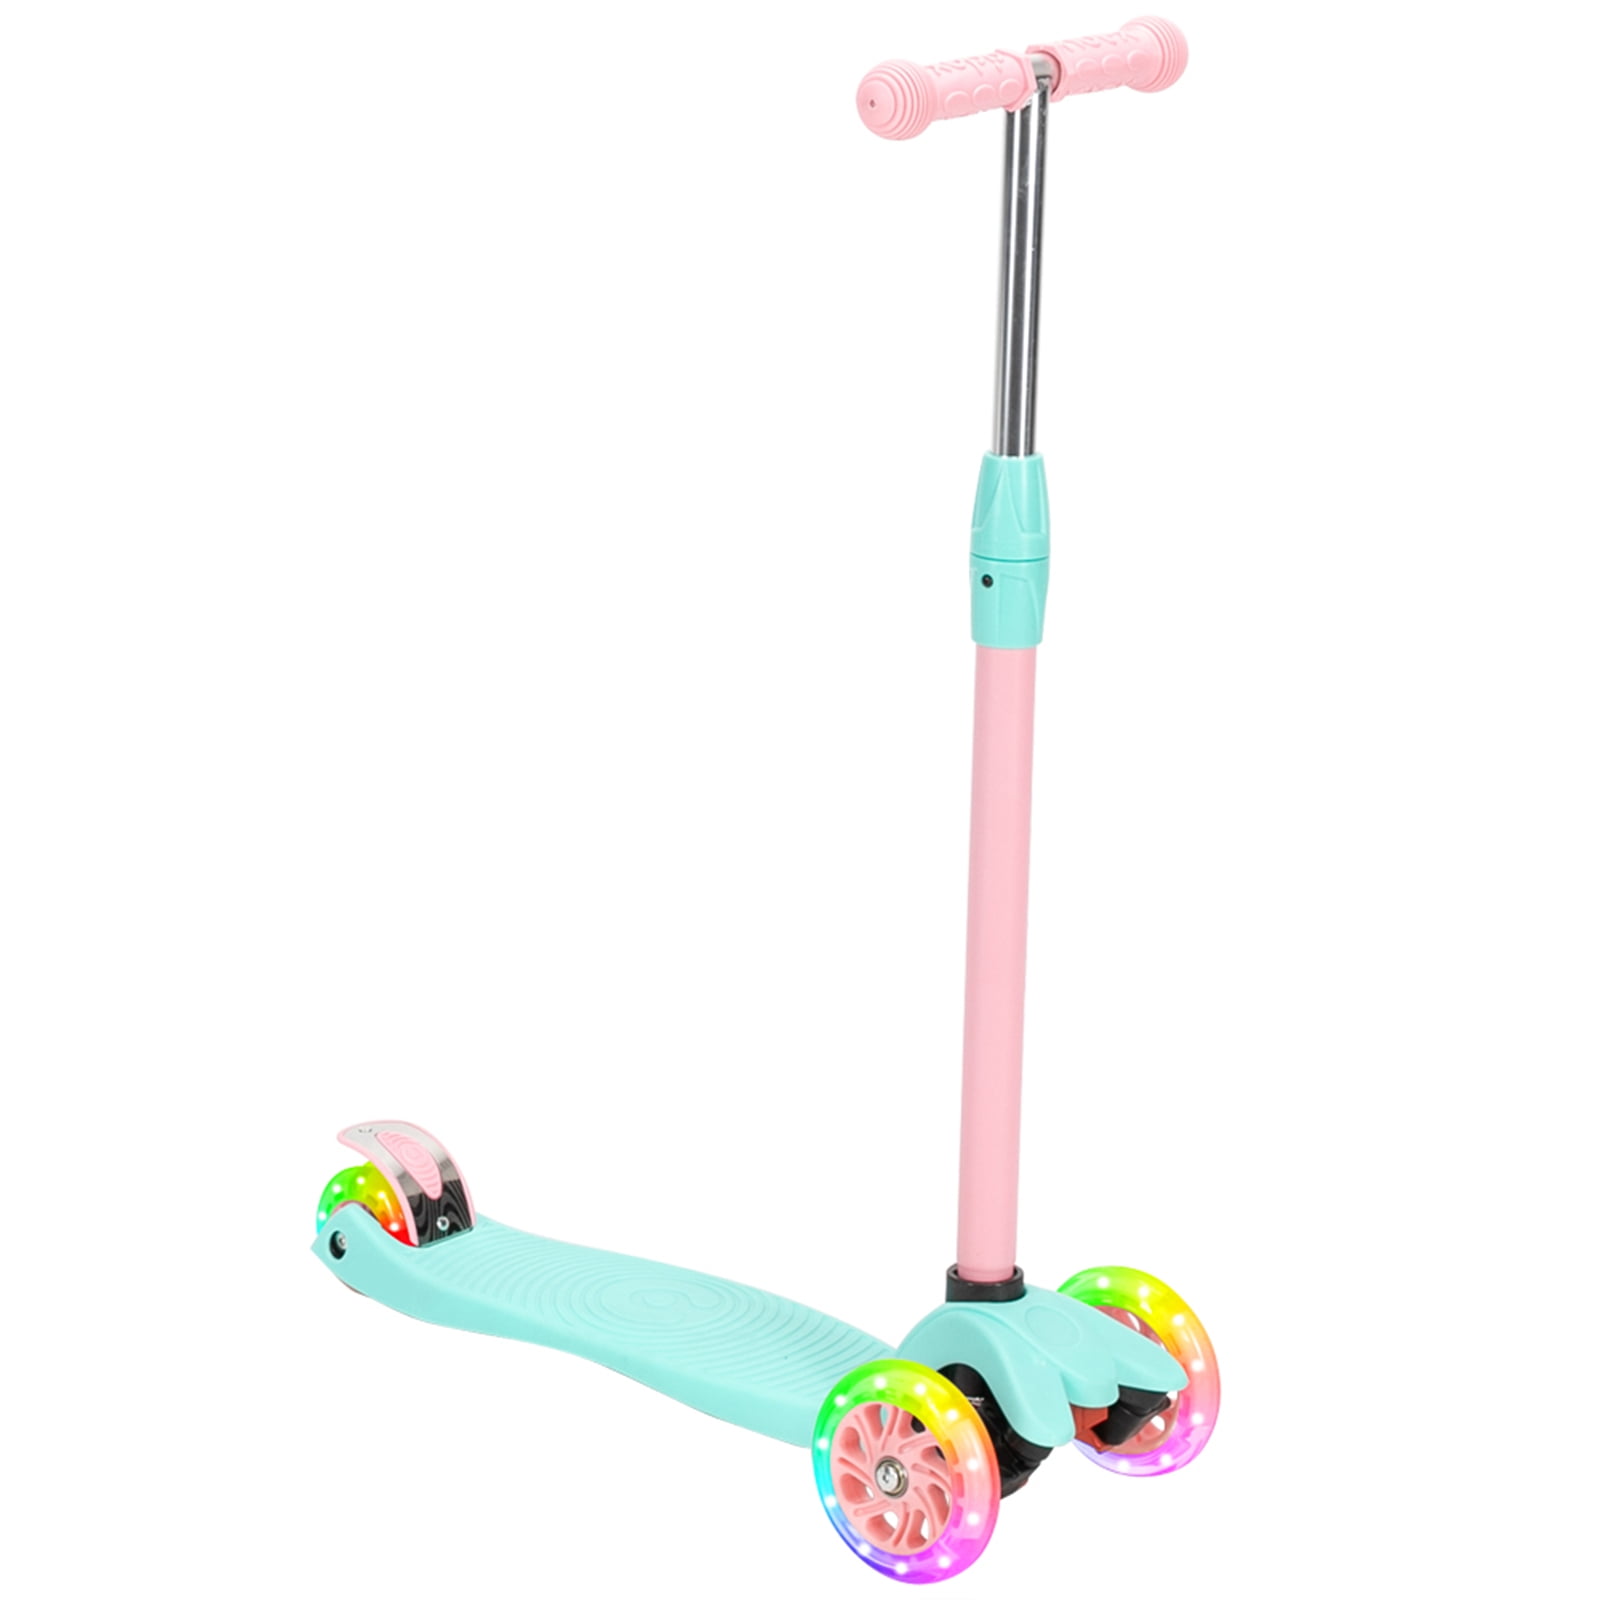 Details about   3 LED Wheels Kick Kids Child Toddlers Scooter Adjustable Height For Girls# 